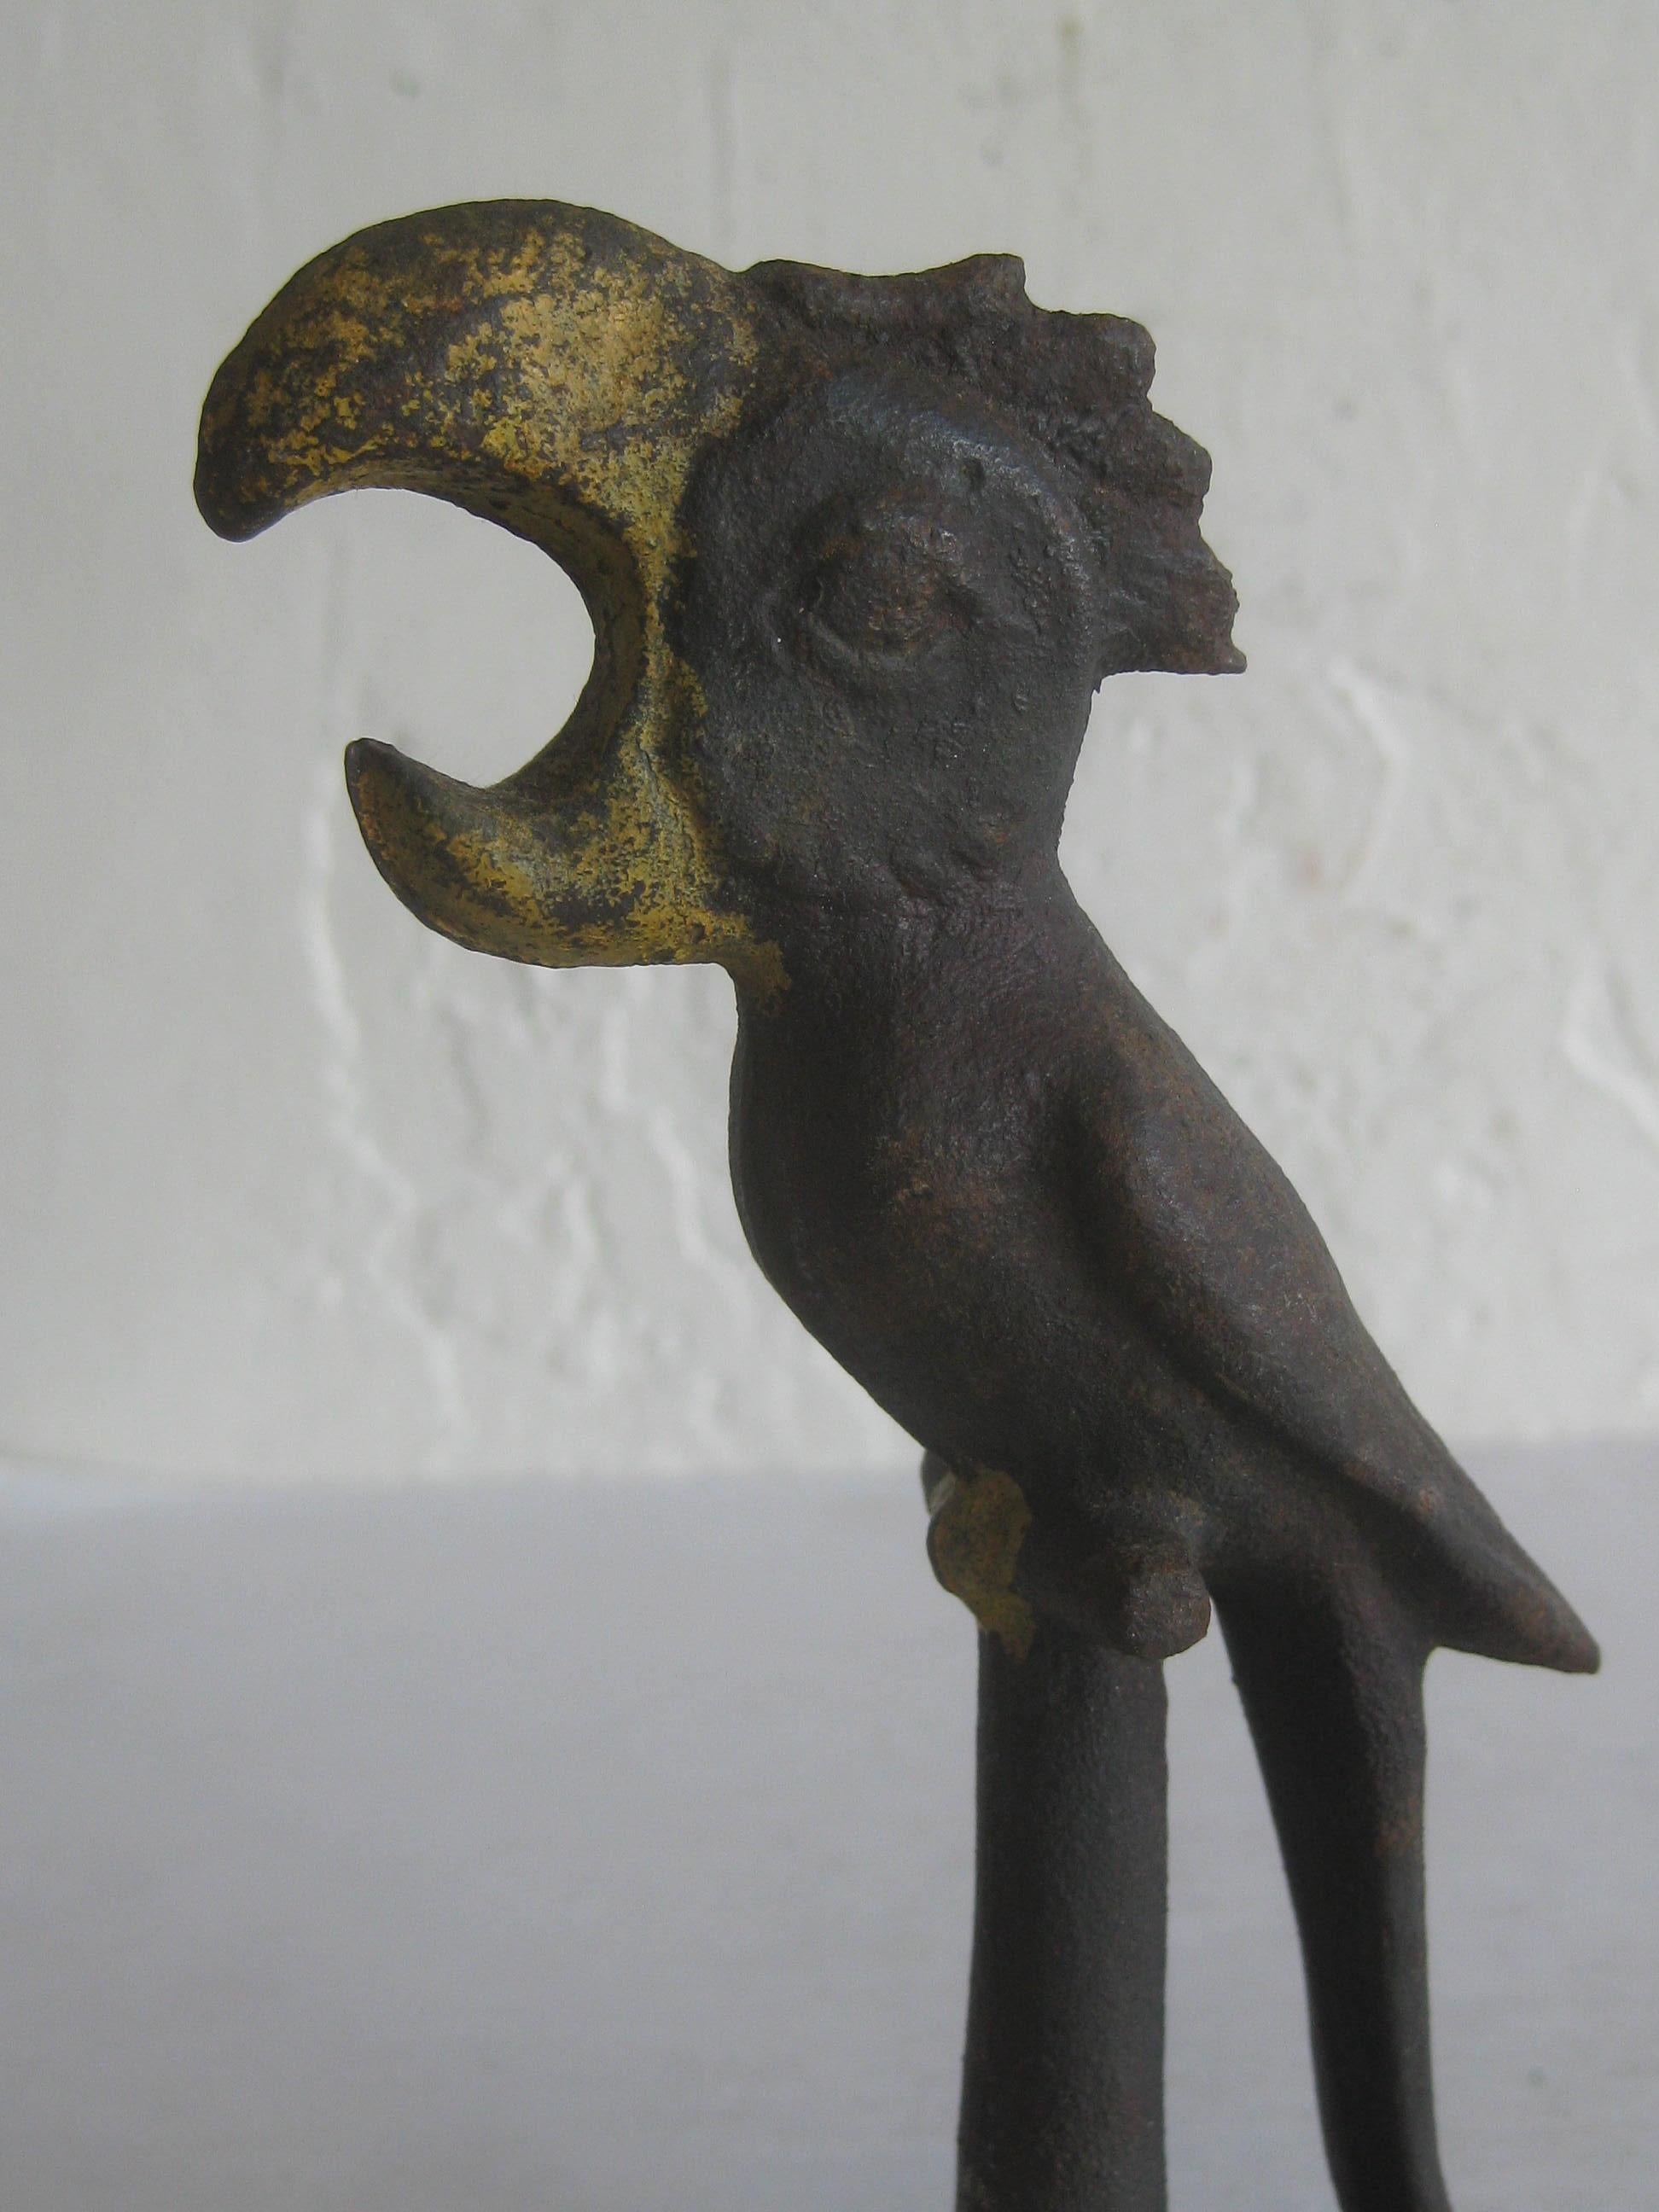 Wonderful antique Art Deco figural parrot bird bar bottle opener. Made of cast iron and has the remains of the original cold paint. Great detail and form. No broken parts or cracks. Measures approx. 5 1/2